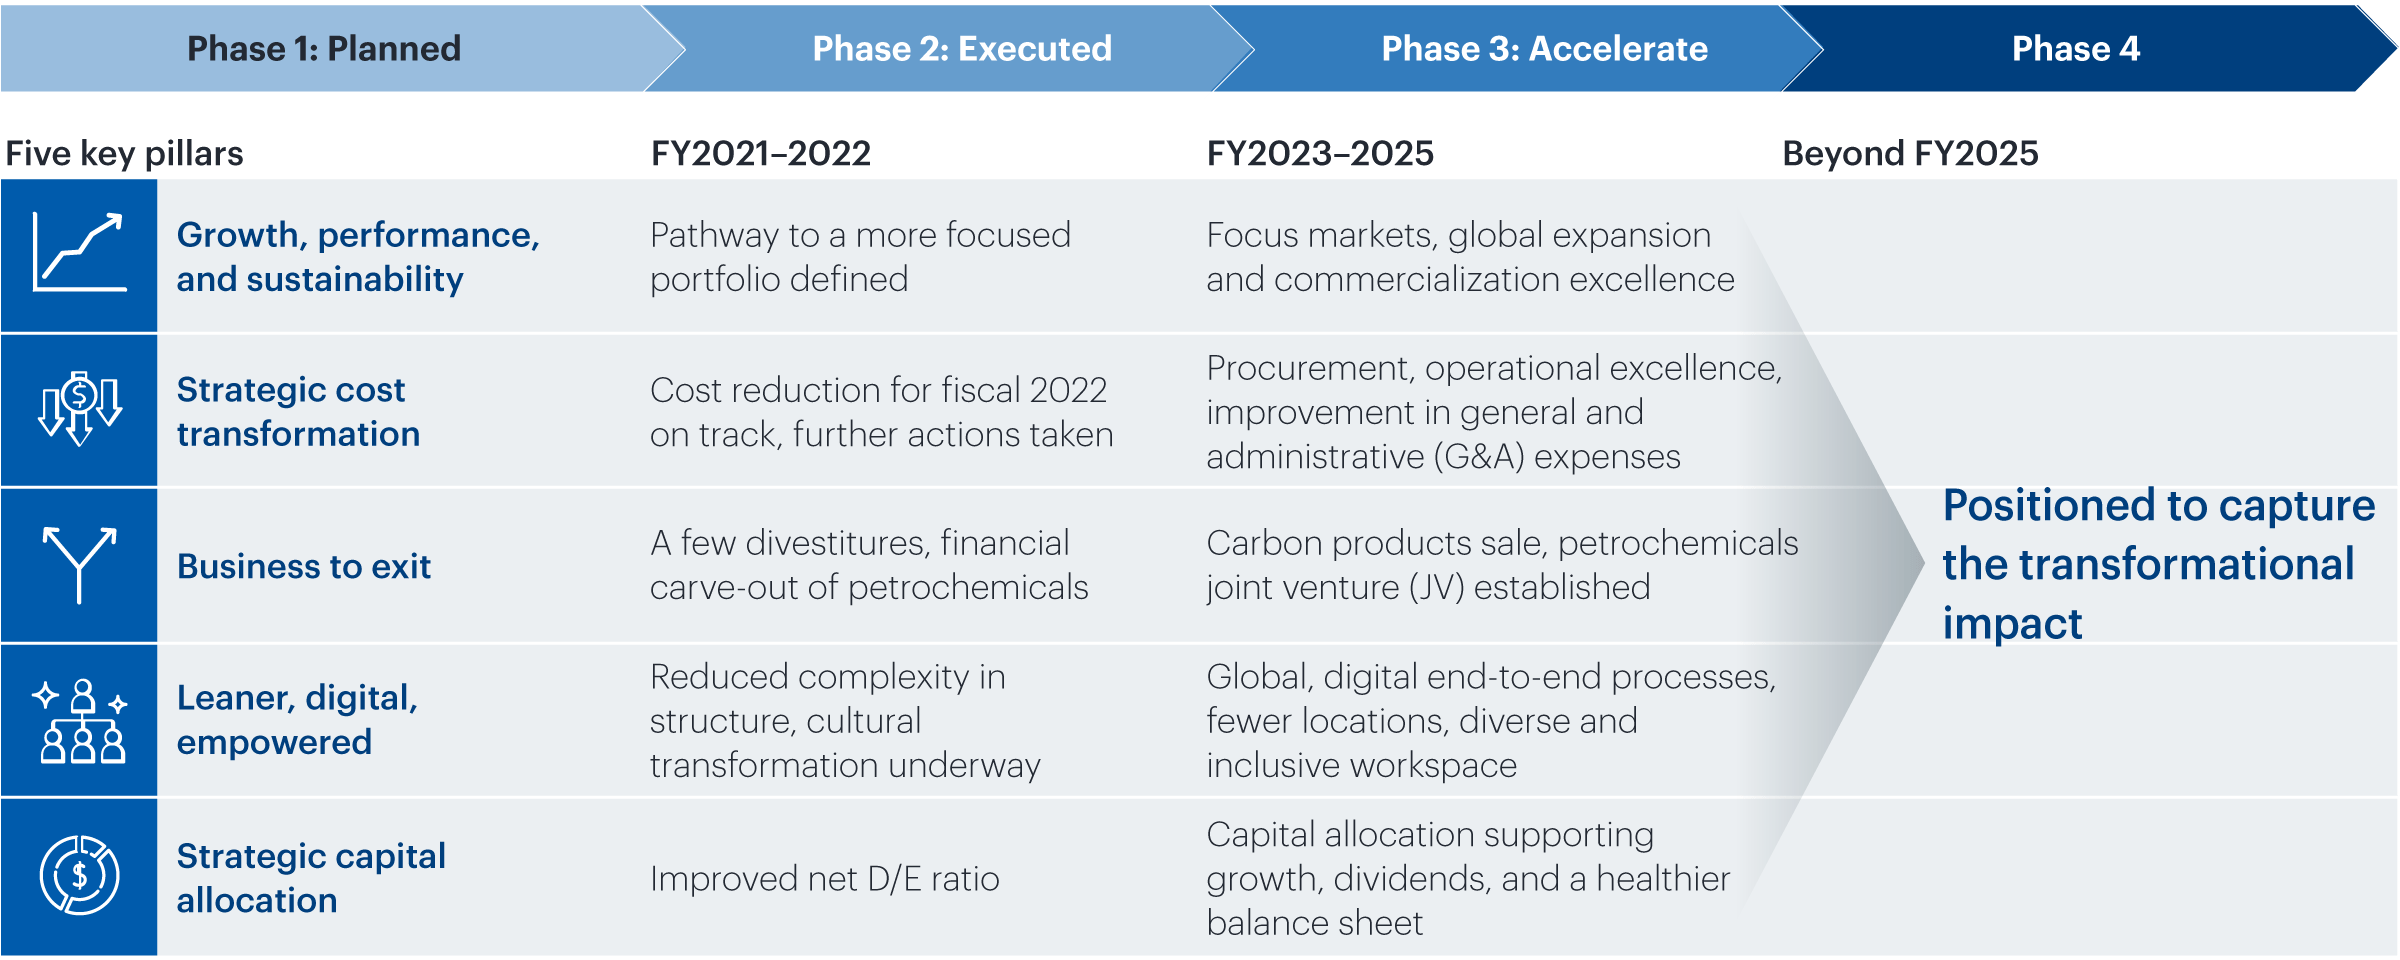 Phase 1: Planned Five key pillars Growth, performance, and sustainability Strategic cost transformation Business to exit Leaner, digital, empowered Strategic capital allocation Phase 2: Executed FY2021–2022 Pathway to a more focused portfolio defined Cost reduction for fiscal 2022 on track, further actions taken A few divestitures, financial carve-out of petrochemicals Reduced complexity in structure, cultural transformation underway Improved net D/E ratio Phase 3: Accelerate Focus markets, global expansion and commercialization excellence Procurement, operational excellence, improvement in general and administrative (G&A) expenses Carbon products sale, petrochemicals joint venture (JV) established Global, digital end-to-end processes, fewer locations, diverse and inclusive workspace Capital allocation supporting growth, dividends, and a healthier balance sheet Phase 4 Beyond FY2025 Positioned to capture the transformational impact